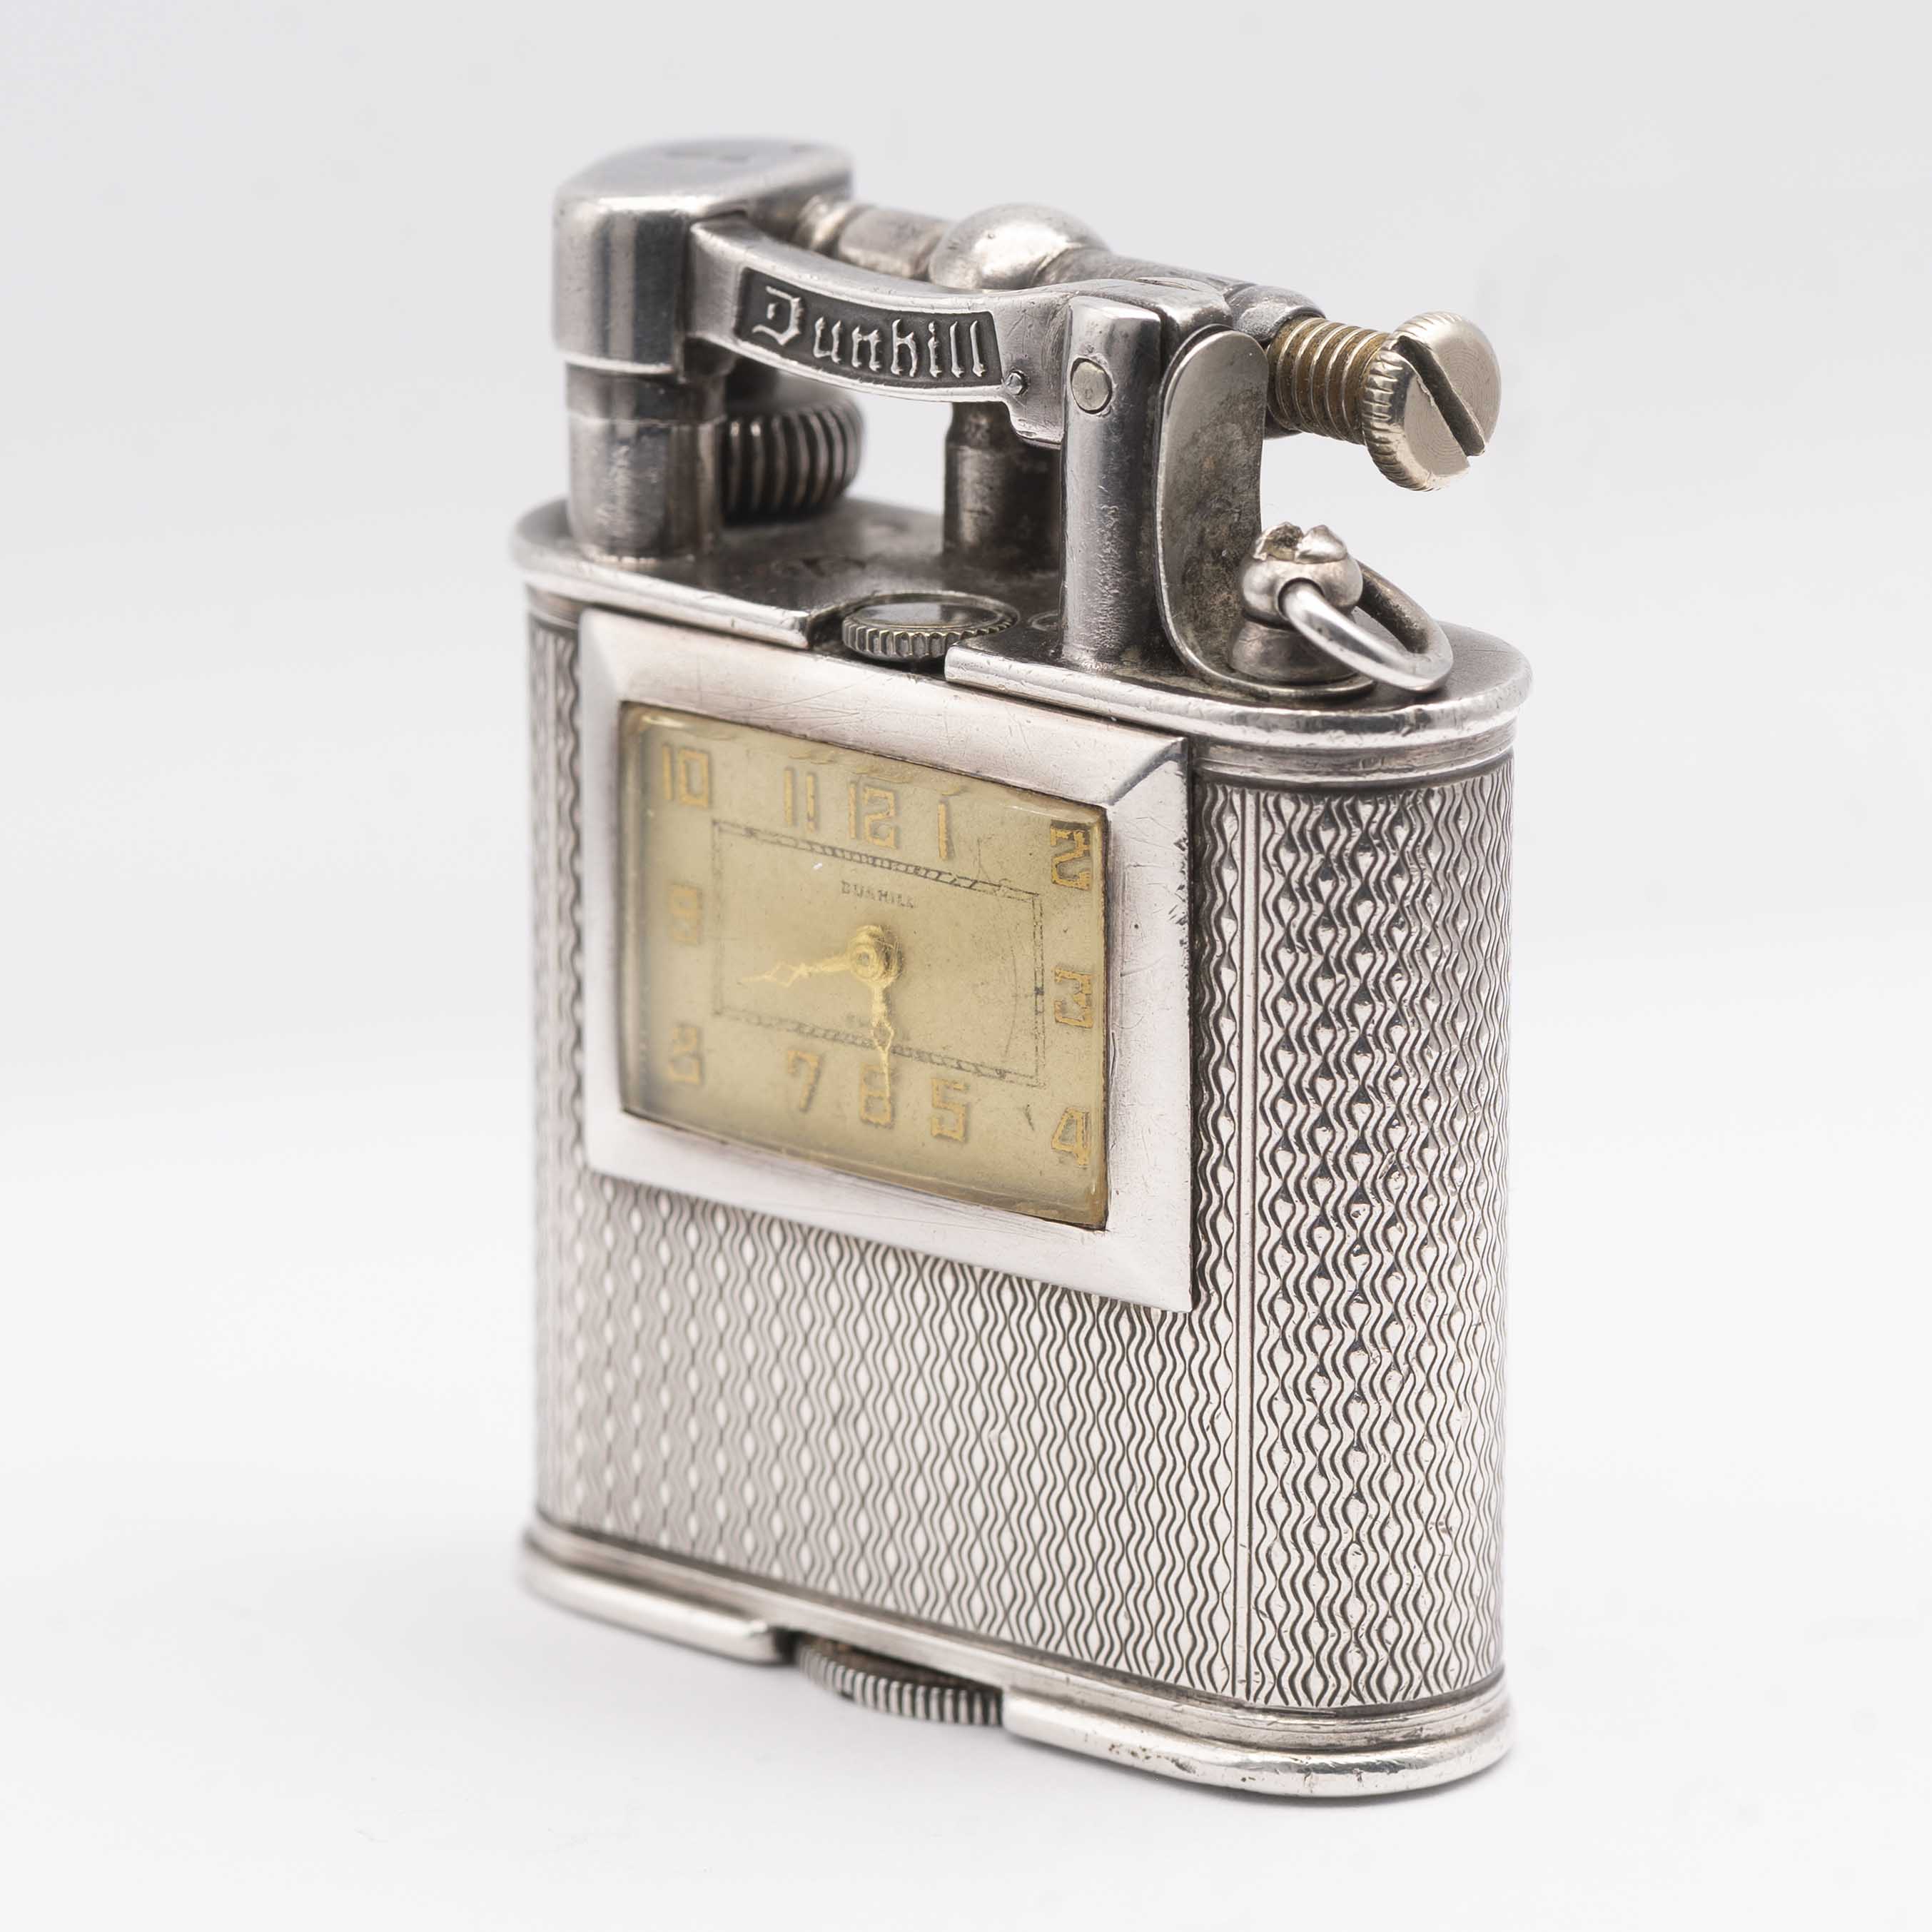 A RARE SOLID SILVER DUNHILL UNIQUE 'A' SELF WINDING WATCH LIGHTER CIRCA 1930s Movement: Manual - Image 4 of 7